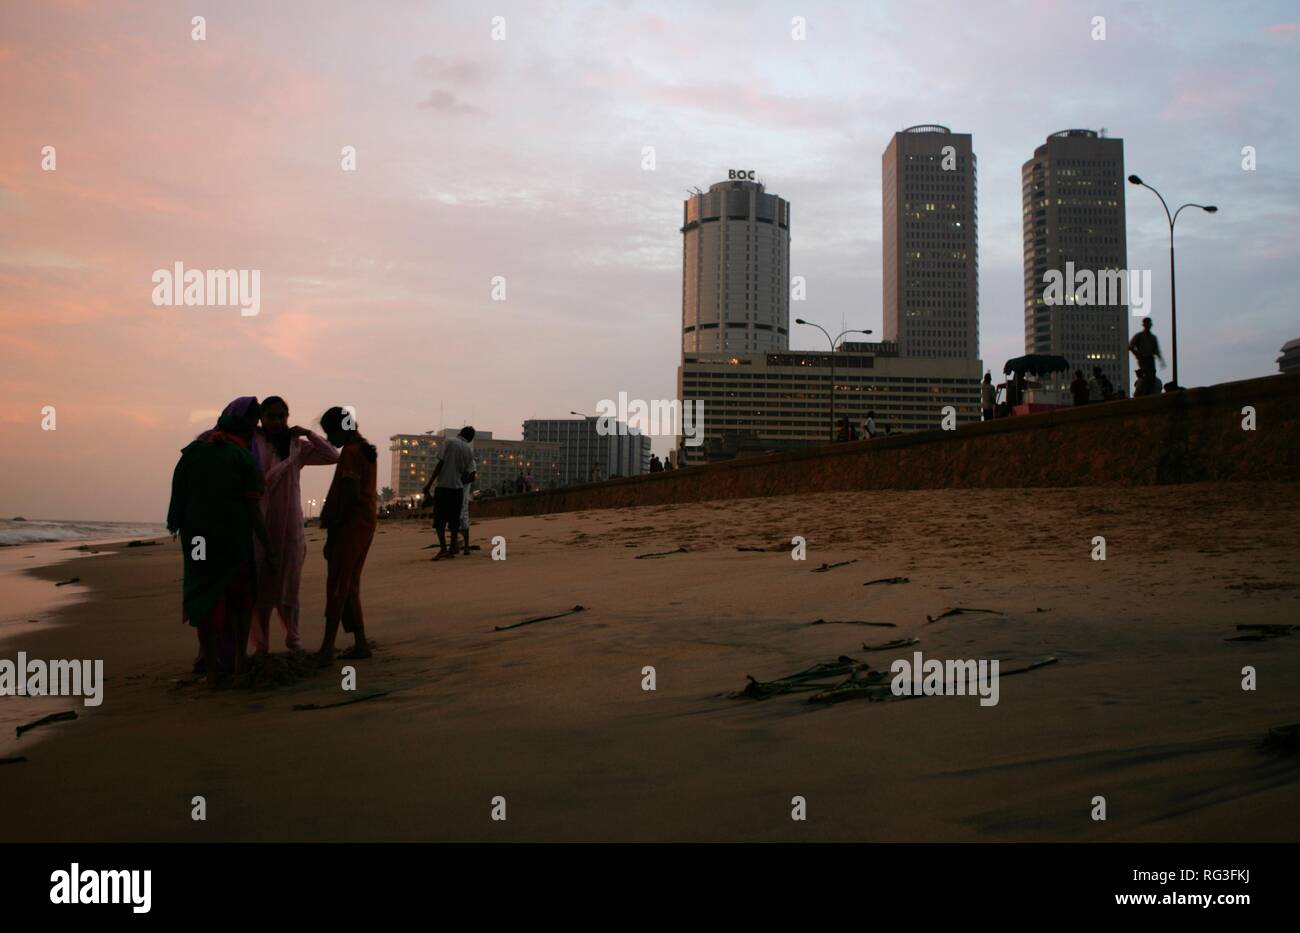 LKA, Sri Lanka : Capital Colombo, City center, GAlle Face Drive, Prommenade at the Indian Ocean. Stock Photo